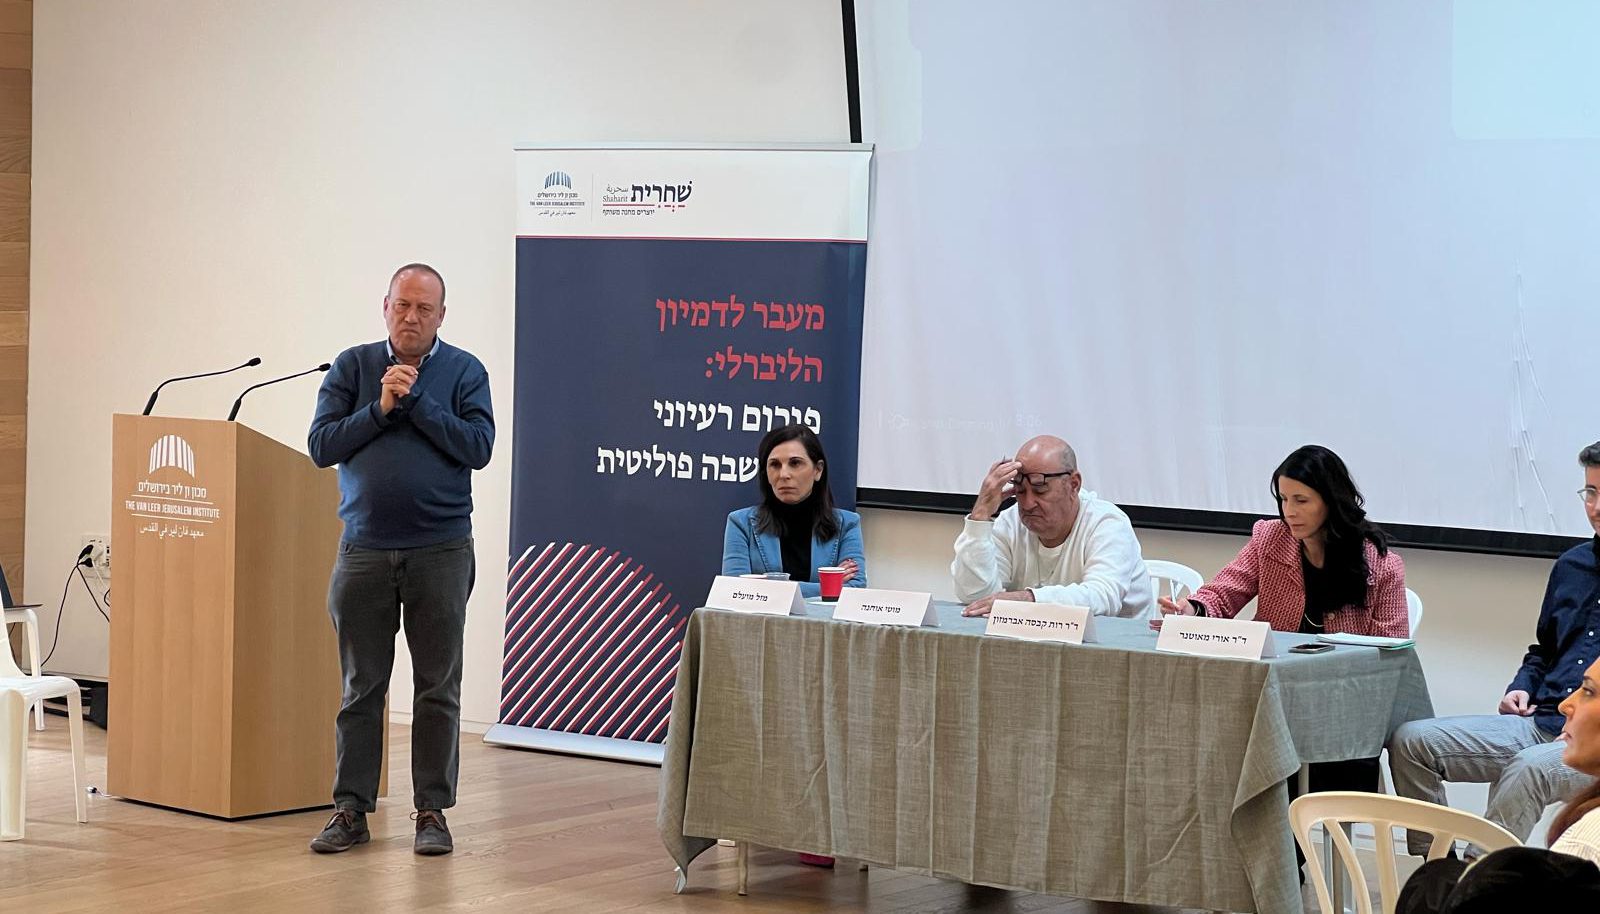 A forum meeting on “the Likud code”